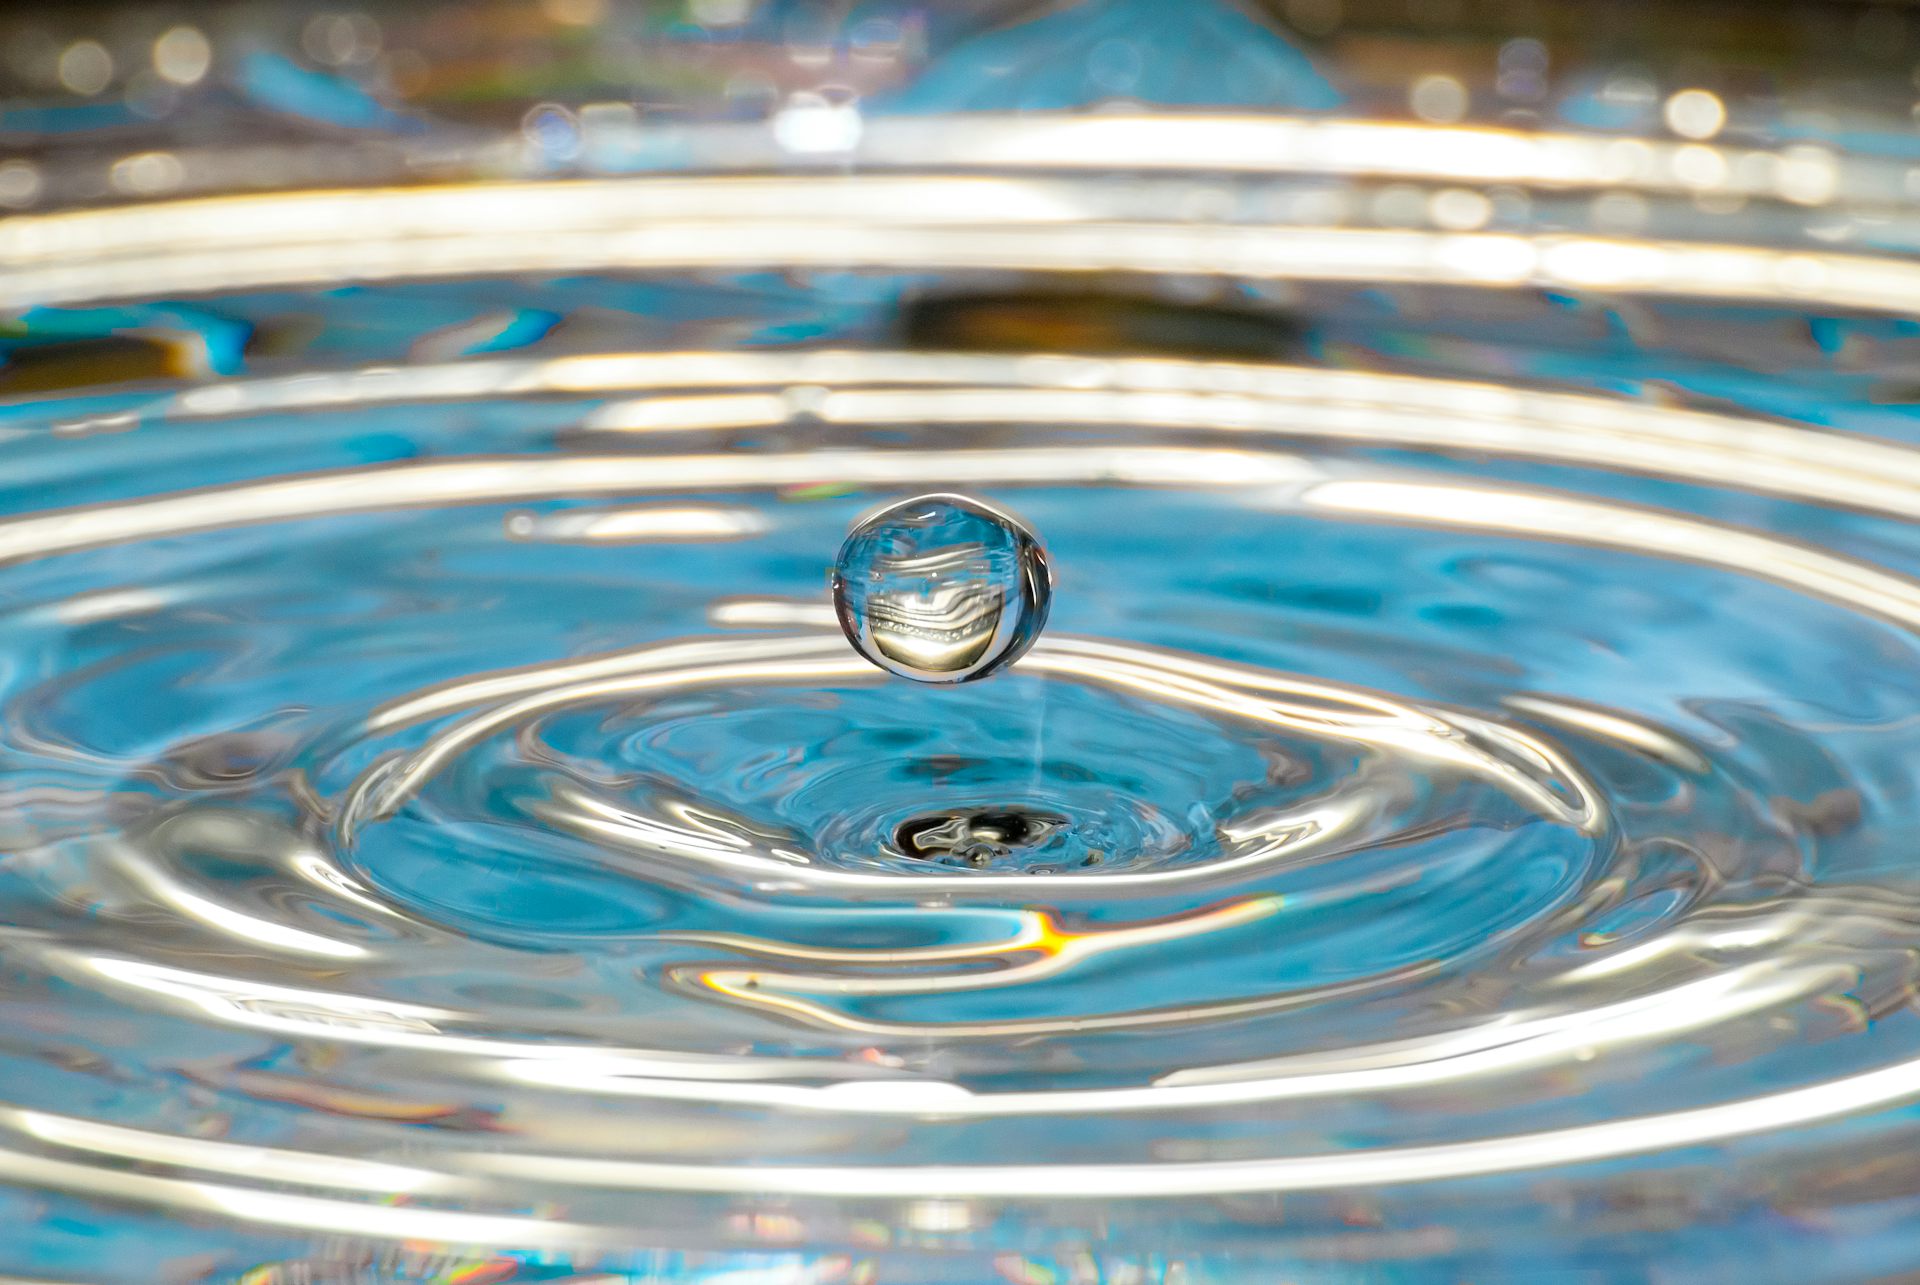 Making a Difference - What's Your Ripple Effect? - Barton Insights